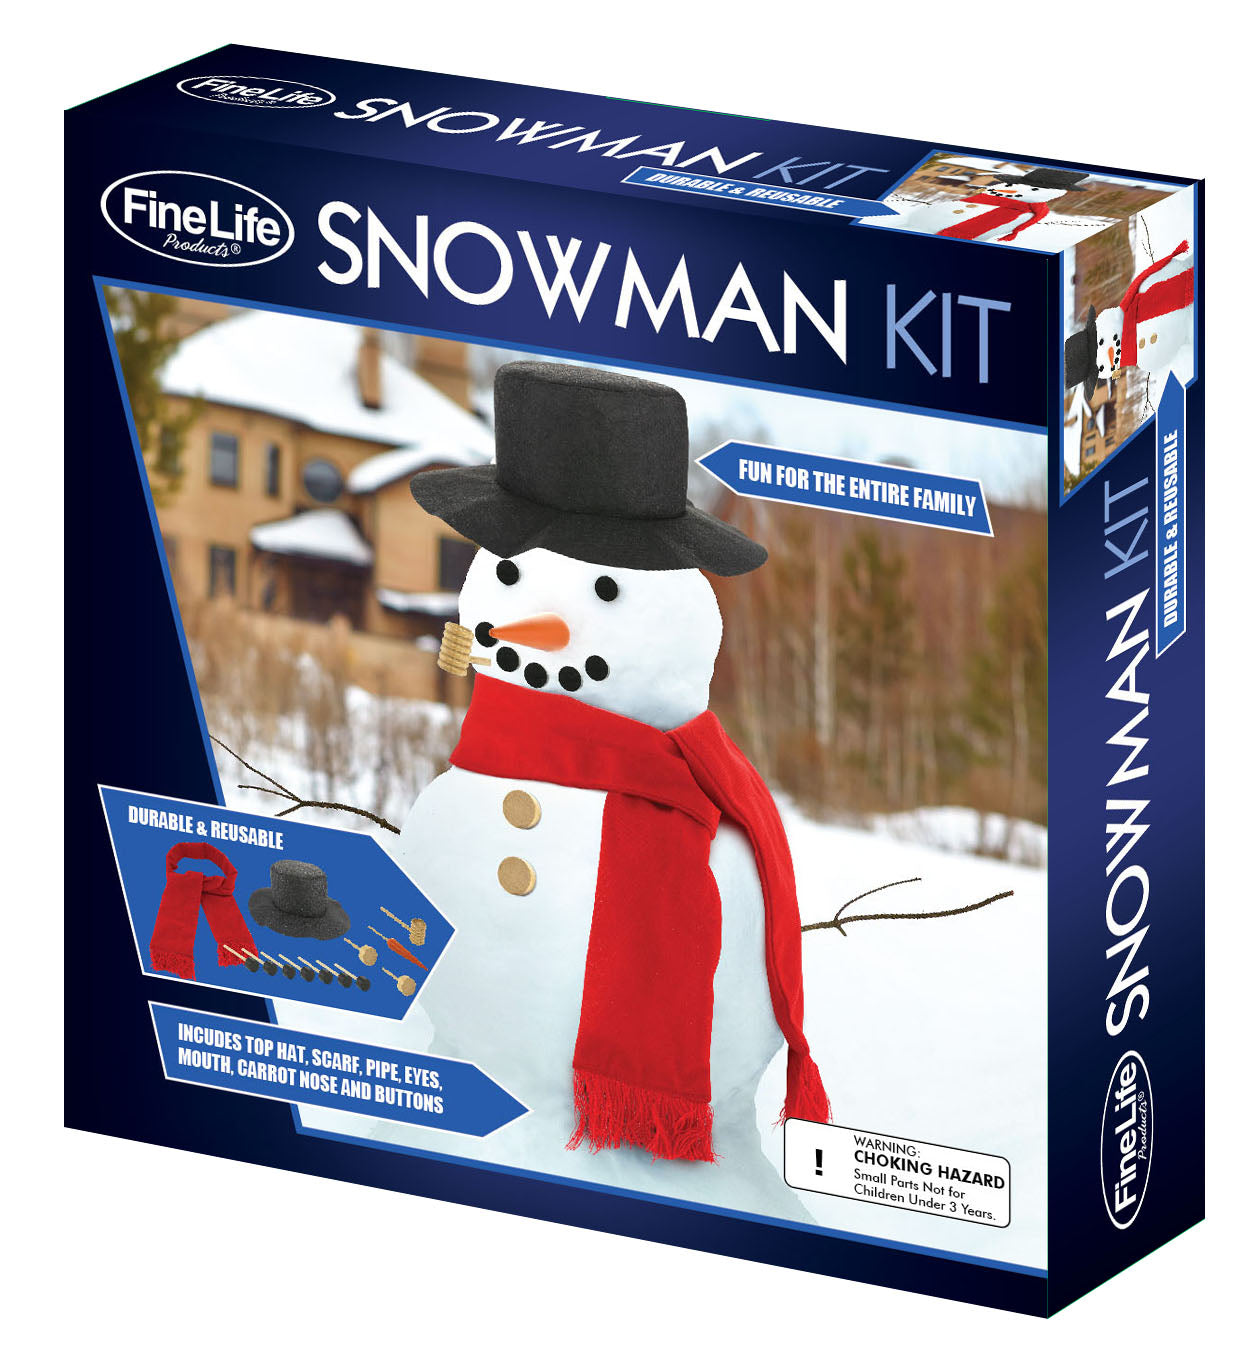 Build Your Own Snowman Kit, Accessories for Kid's Snow & Sled Play,  Multi-Color, Ages 3+ by MinnARK